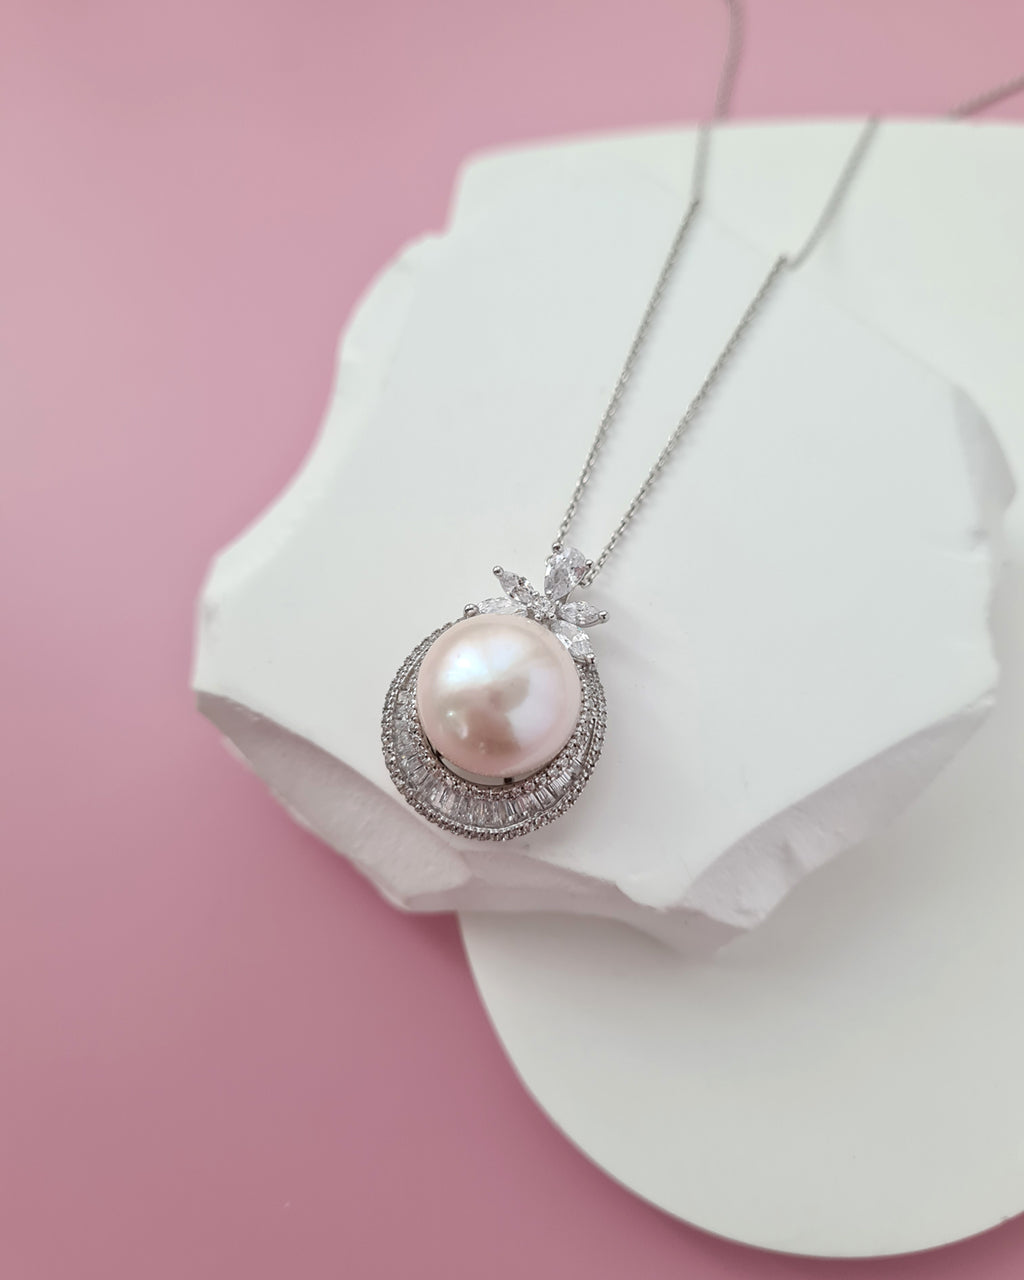 13mm Freshwater Pearl Necklace - Sterling Silver Floral Pendant